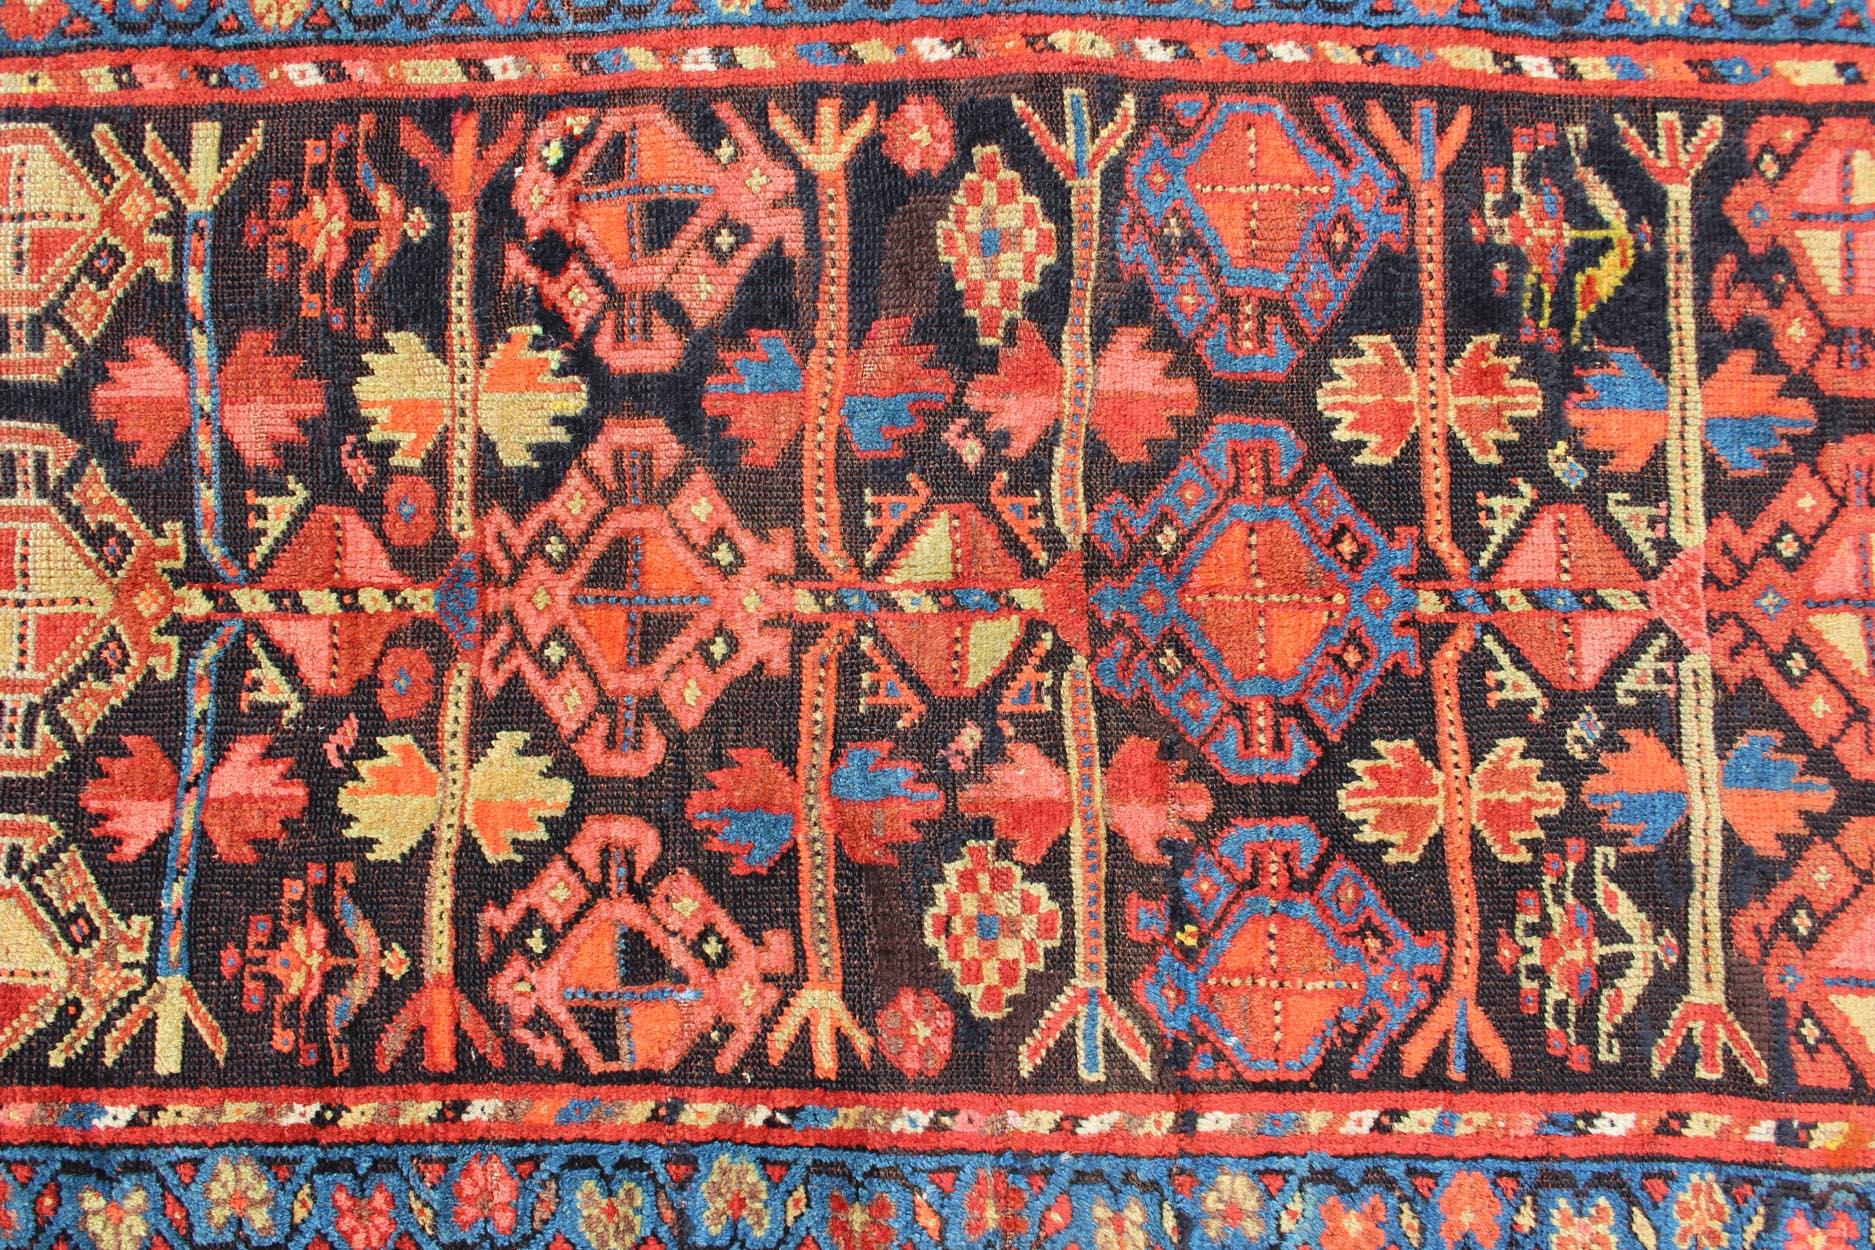 All-Over Tribal Design Antique Persian Kurdish Rug in Blue & Red In Excellent Condition For Sale In Atlanta, GA